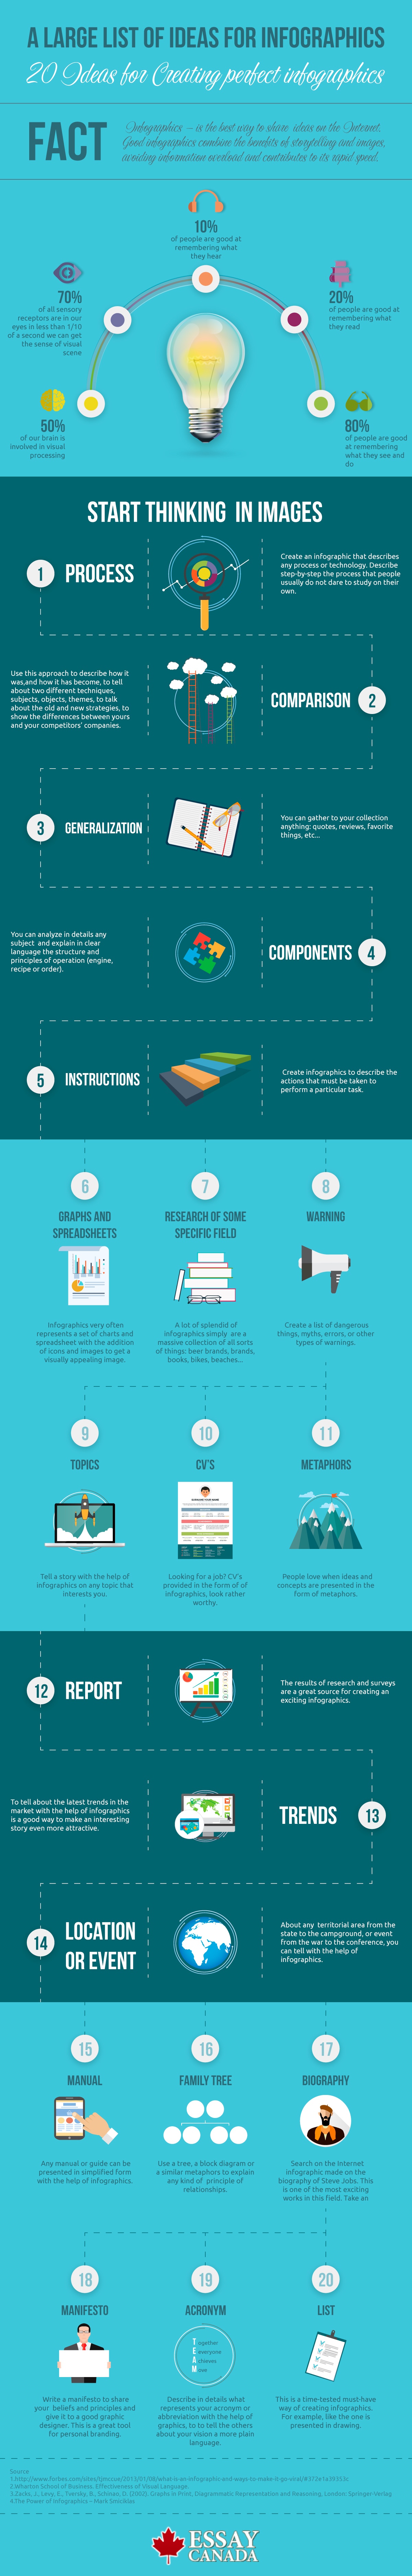 20 Ideas for Creating Perfect Infographics Infographic - e-Learning